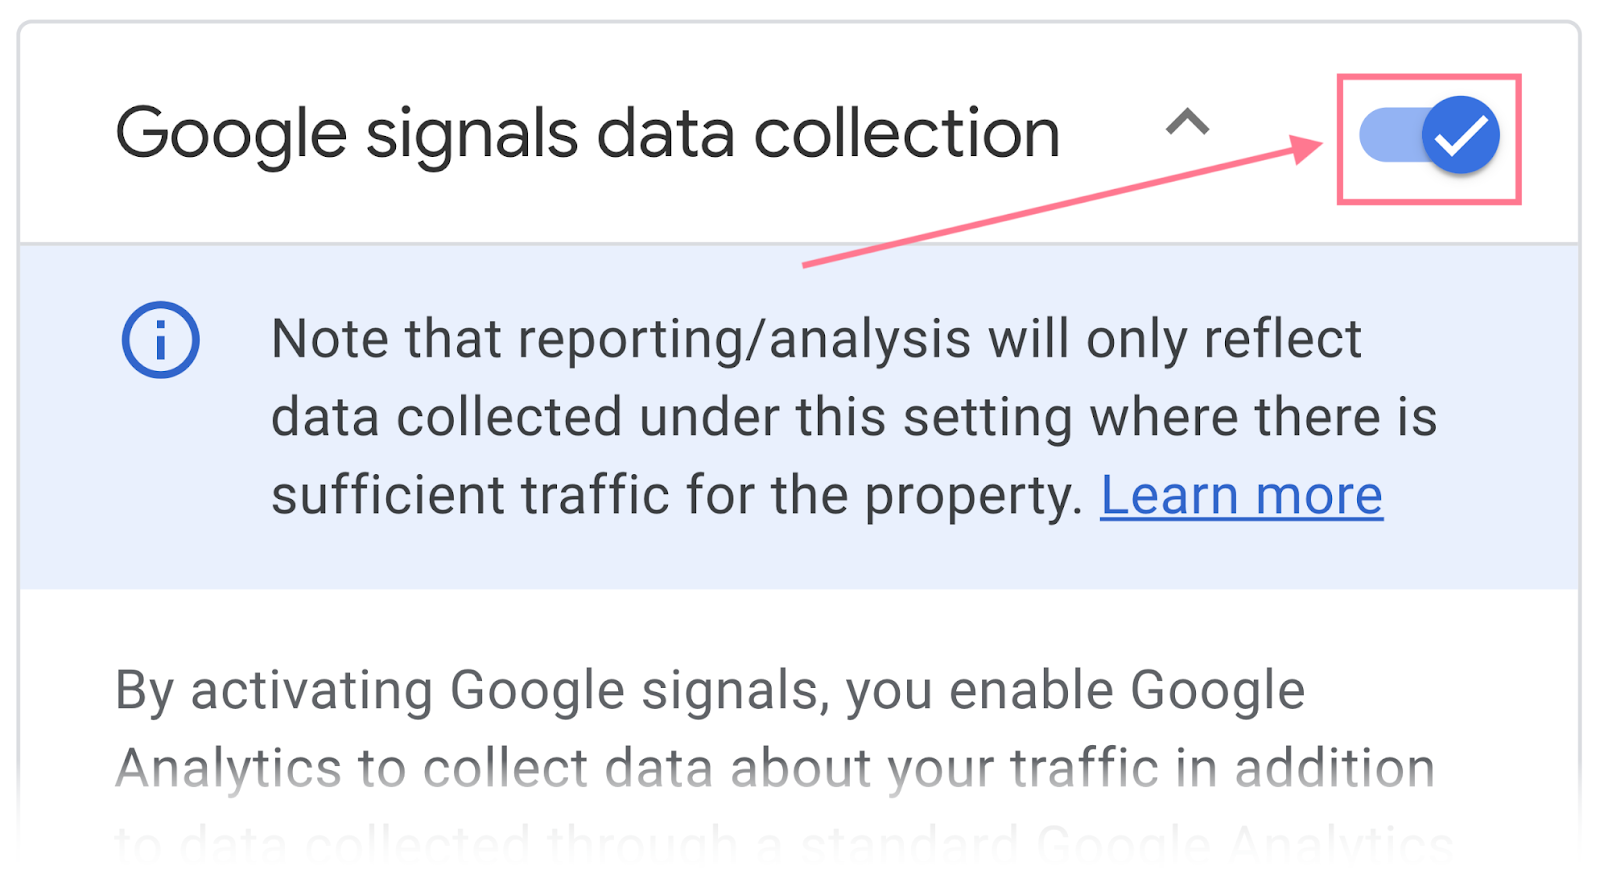 how to enable Google signals data collection